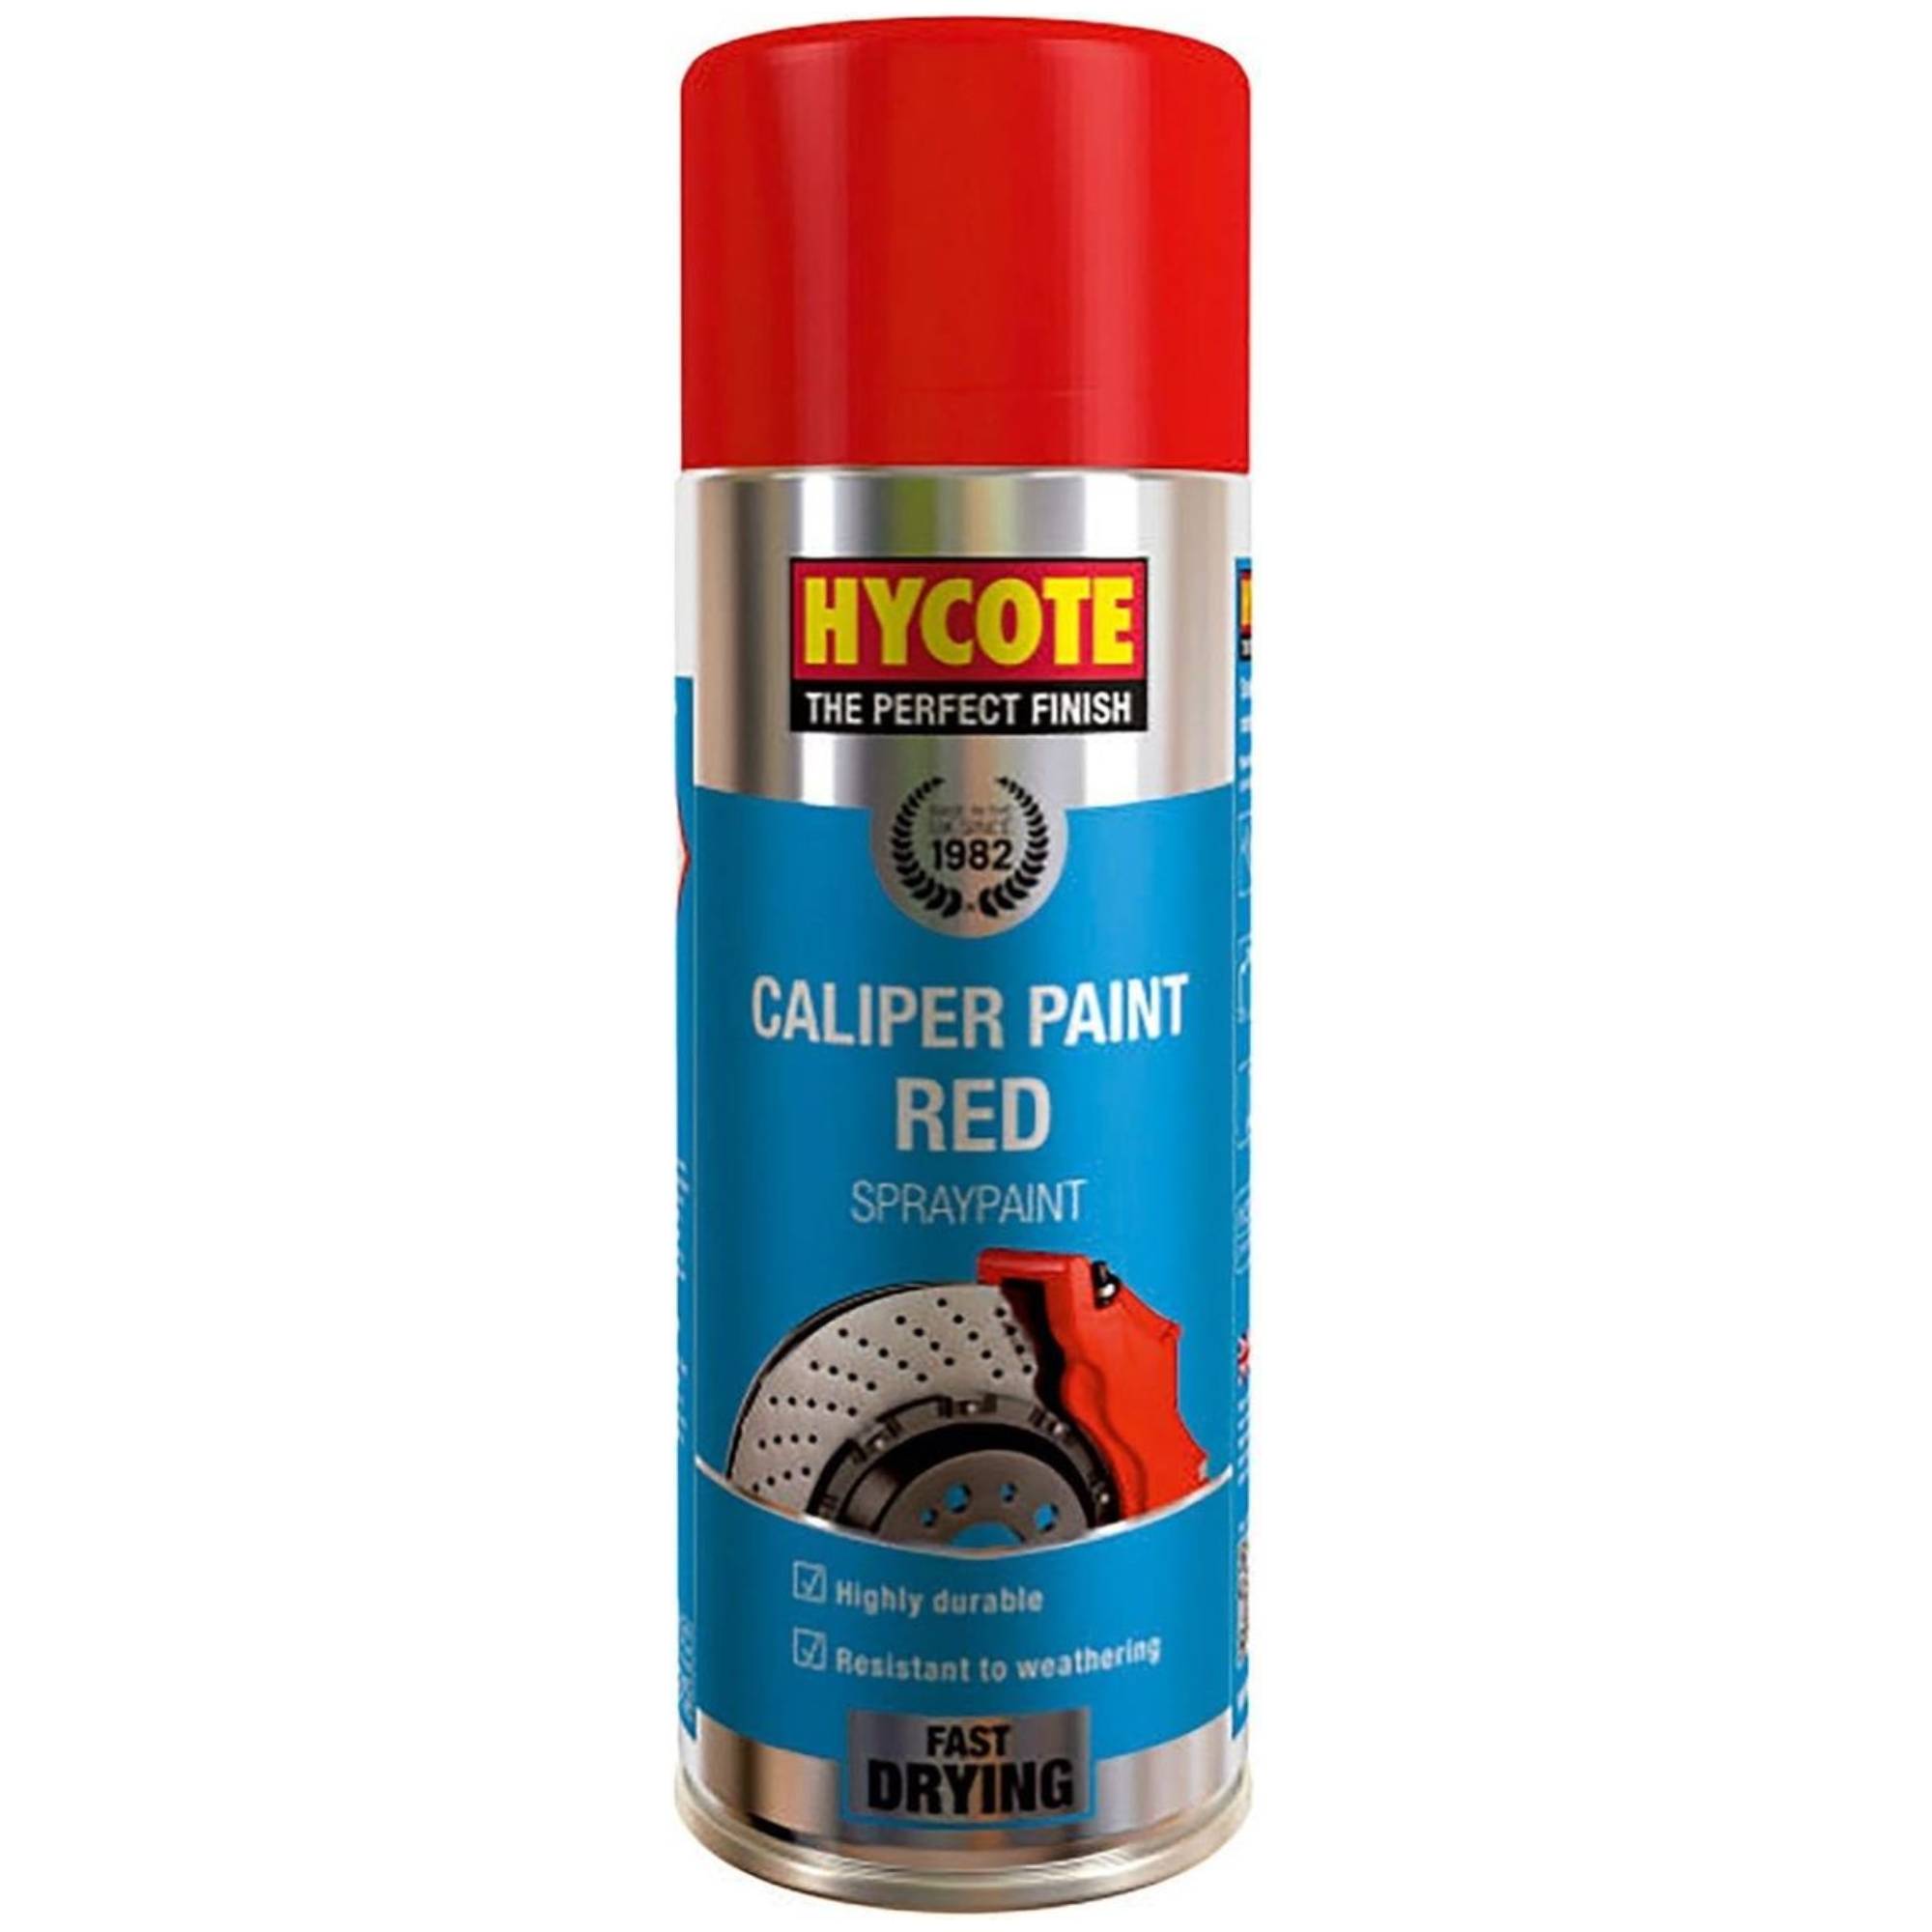 Hycote Caliper Paint Red Spraypaint 400ml